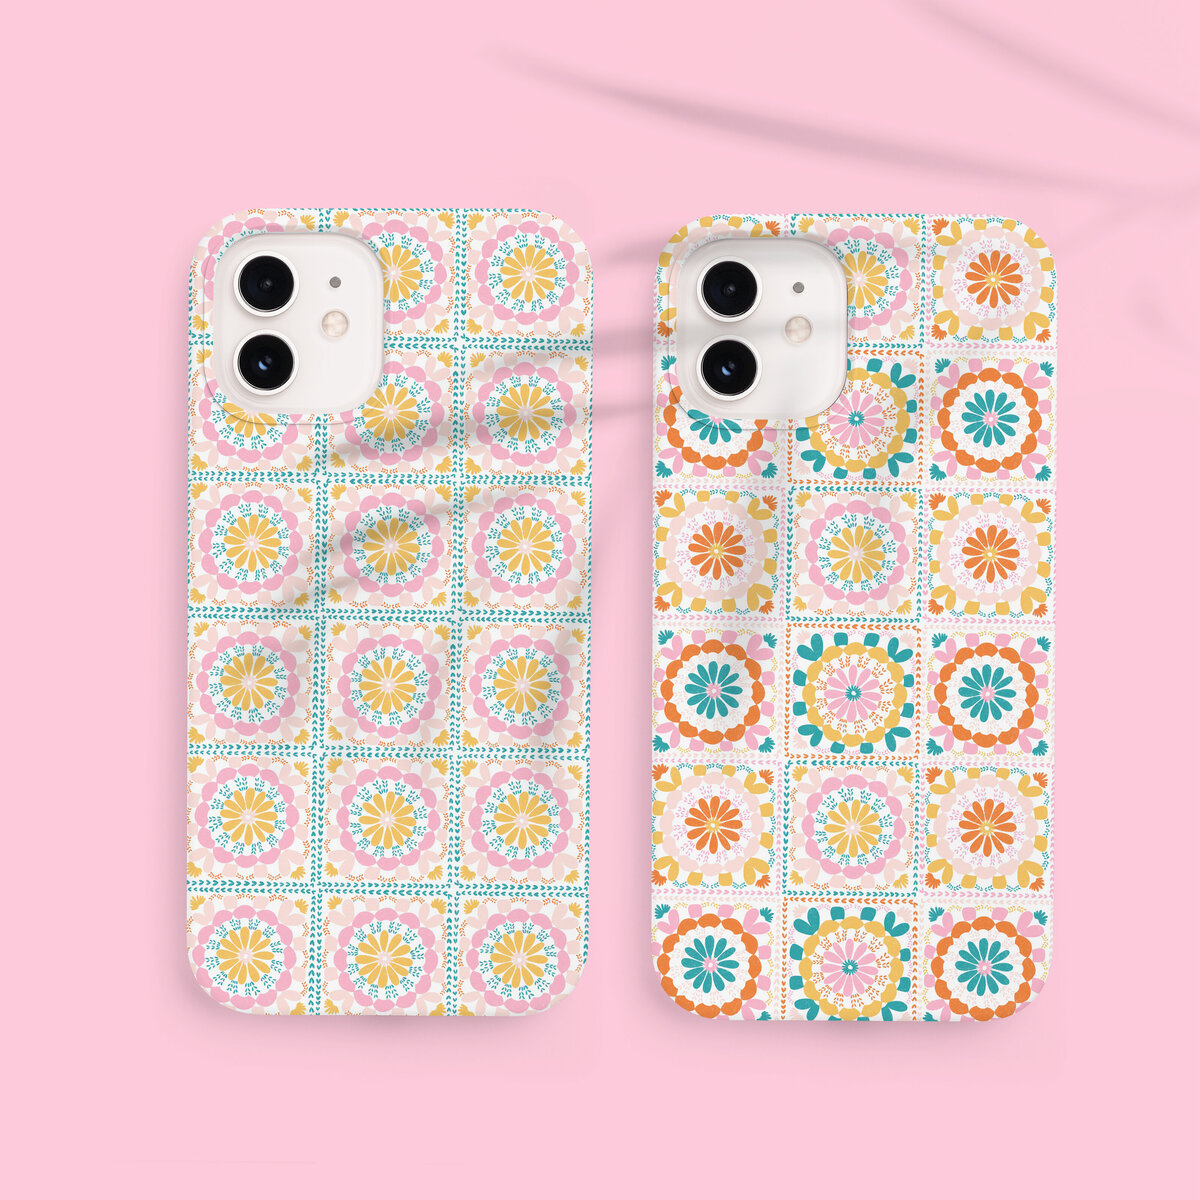 iphone-case-granny-squares-palm-shadow-mockup